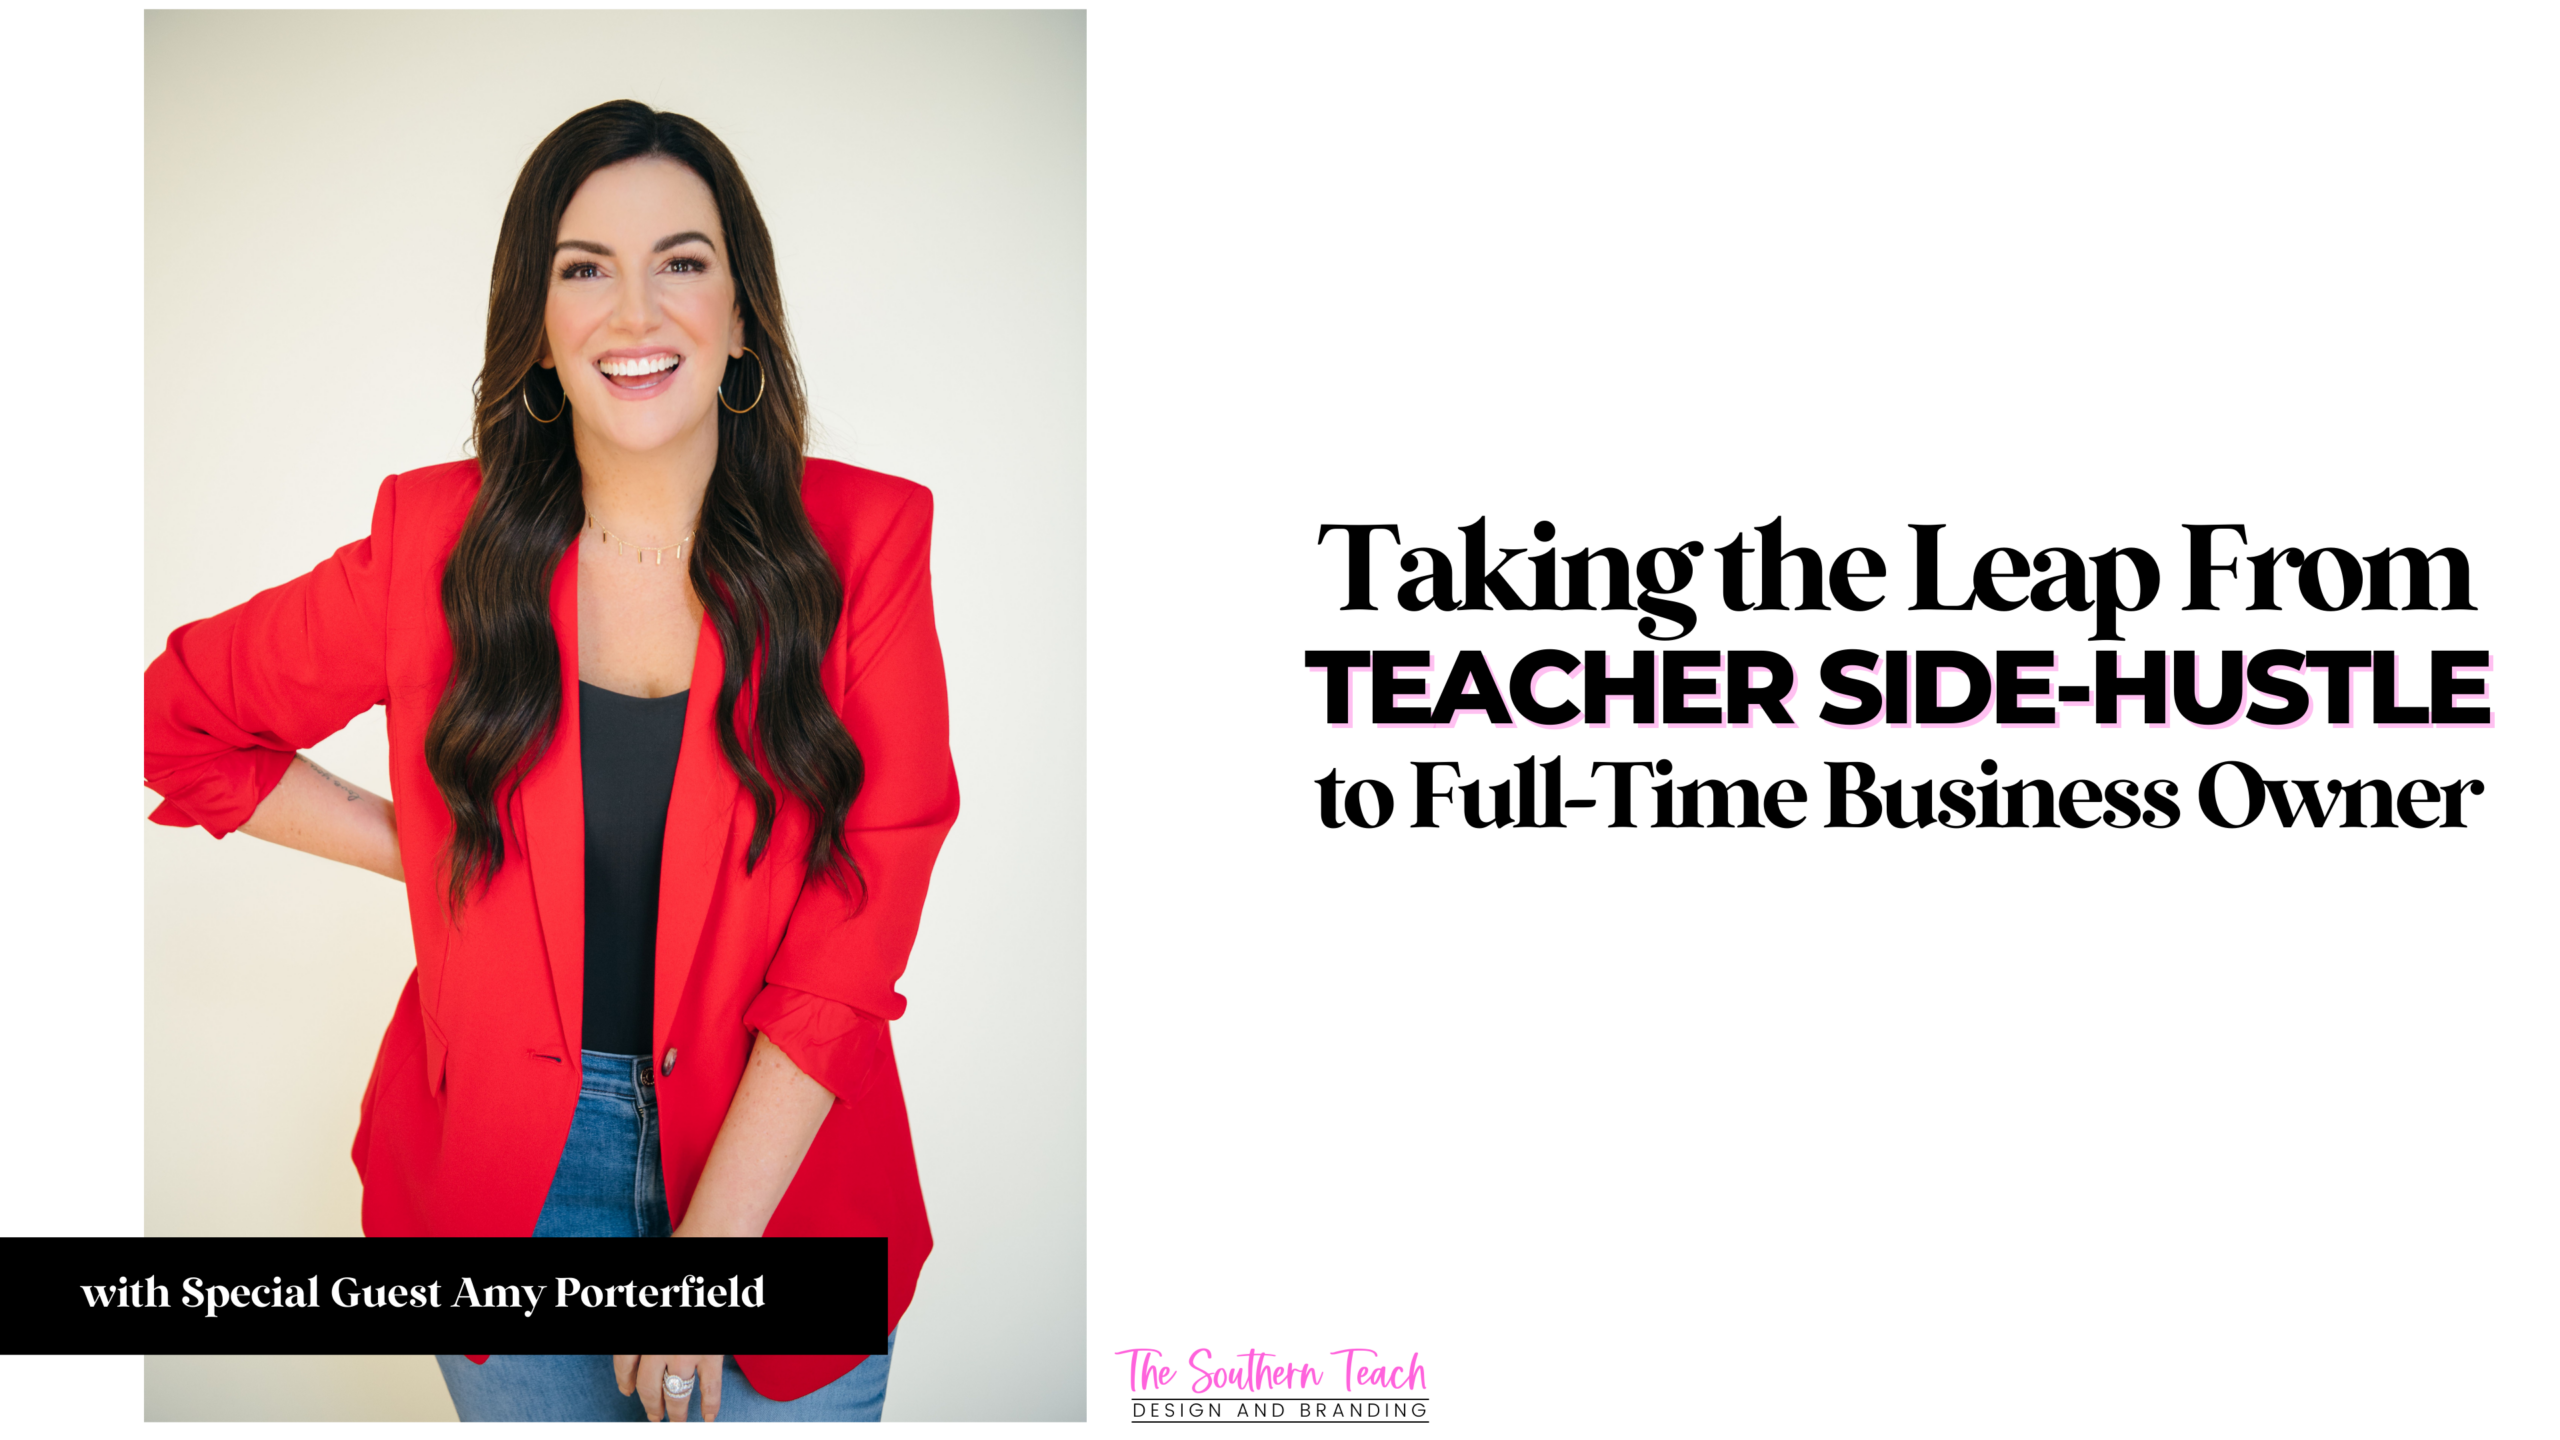 From Teacher Side-Hustle to Business Owner with Amy Porterfield